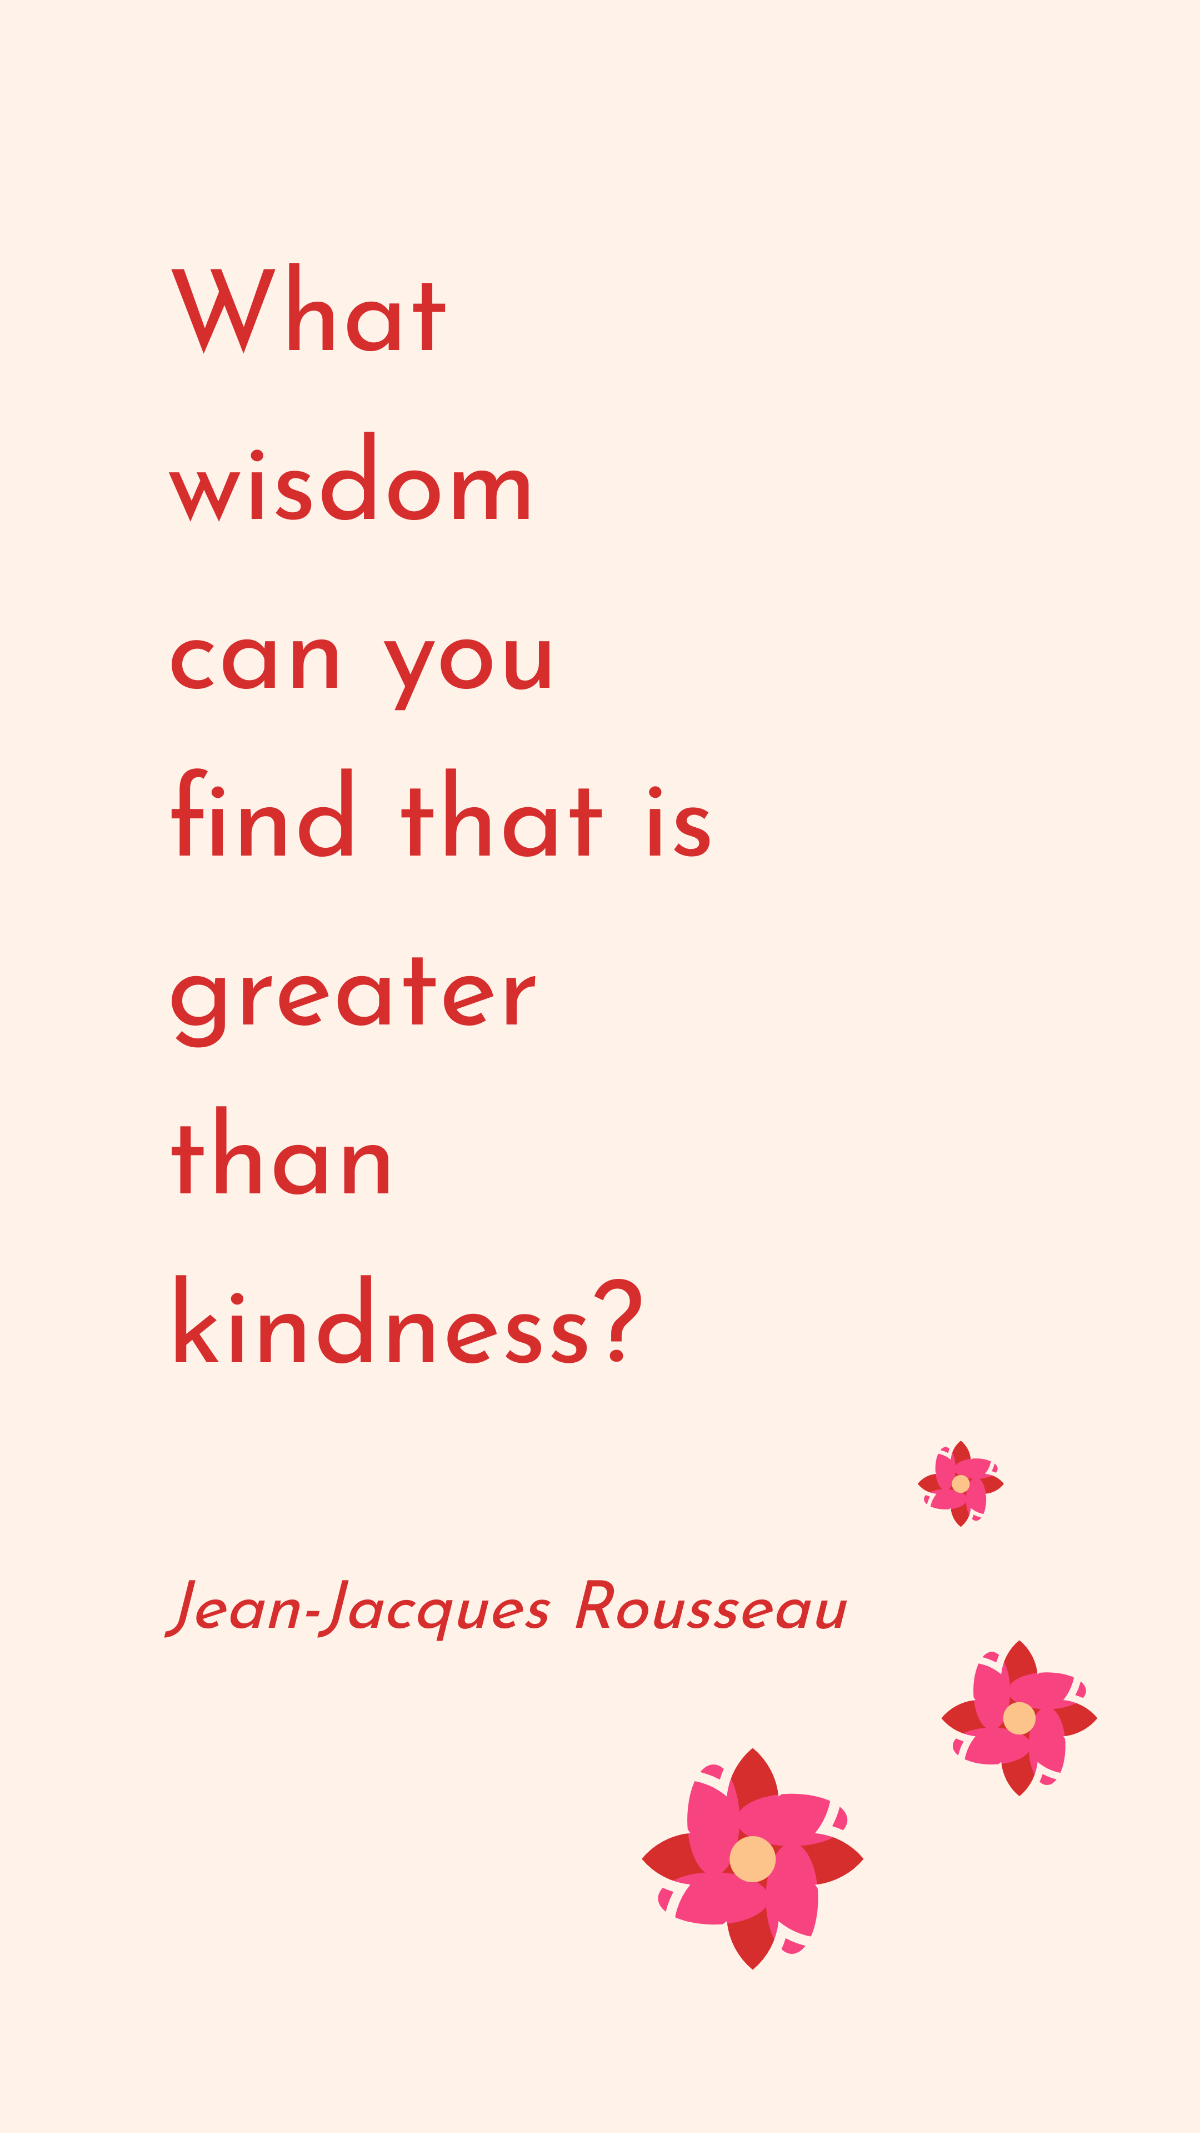 Jean-Jacques Rousseau - What wisdom can you find that is greater than kindness? Template